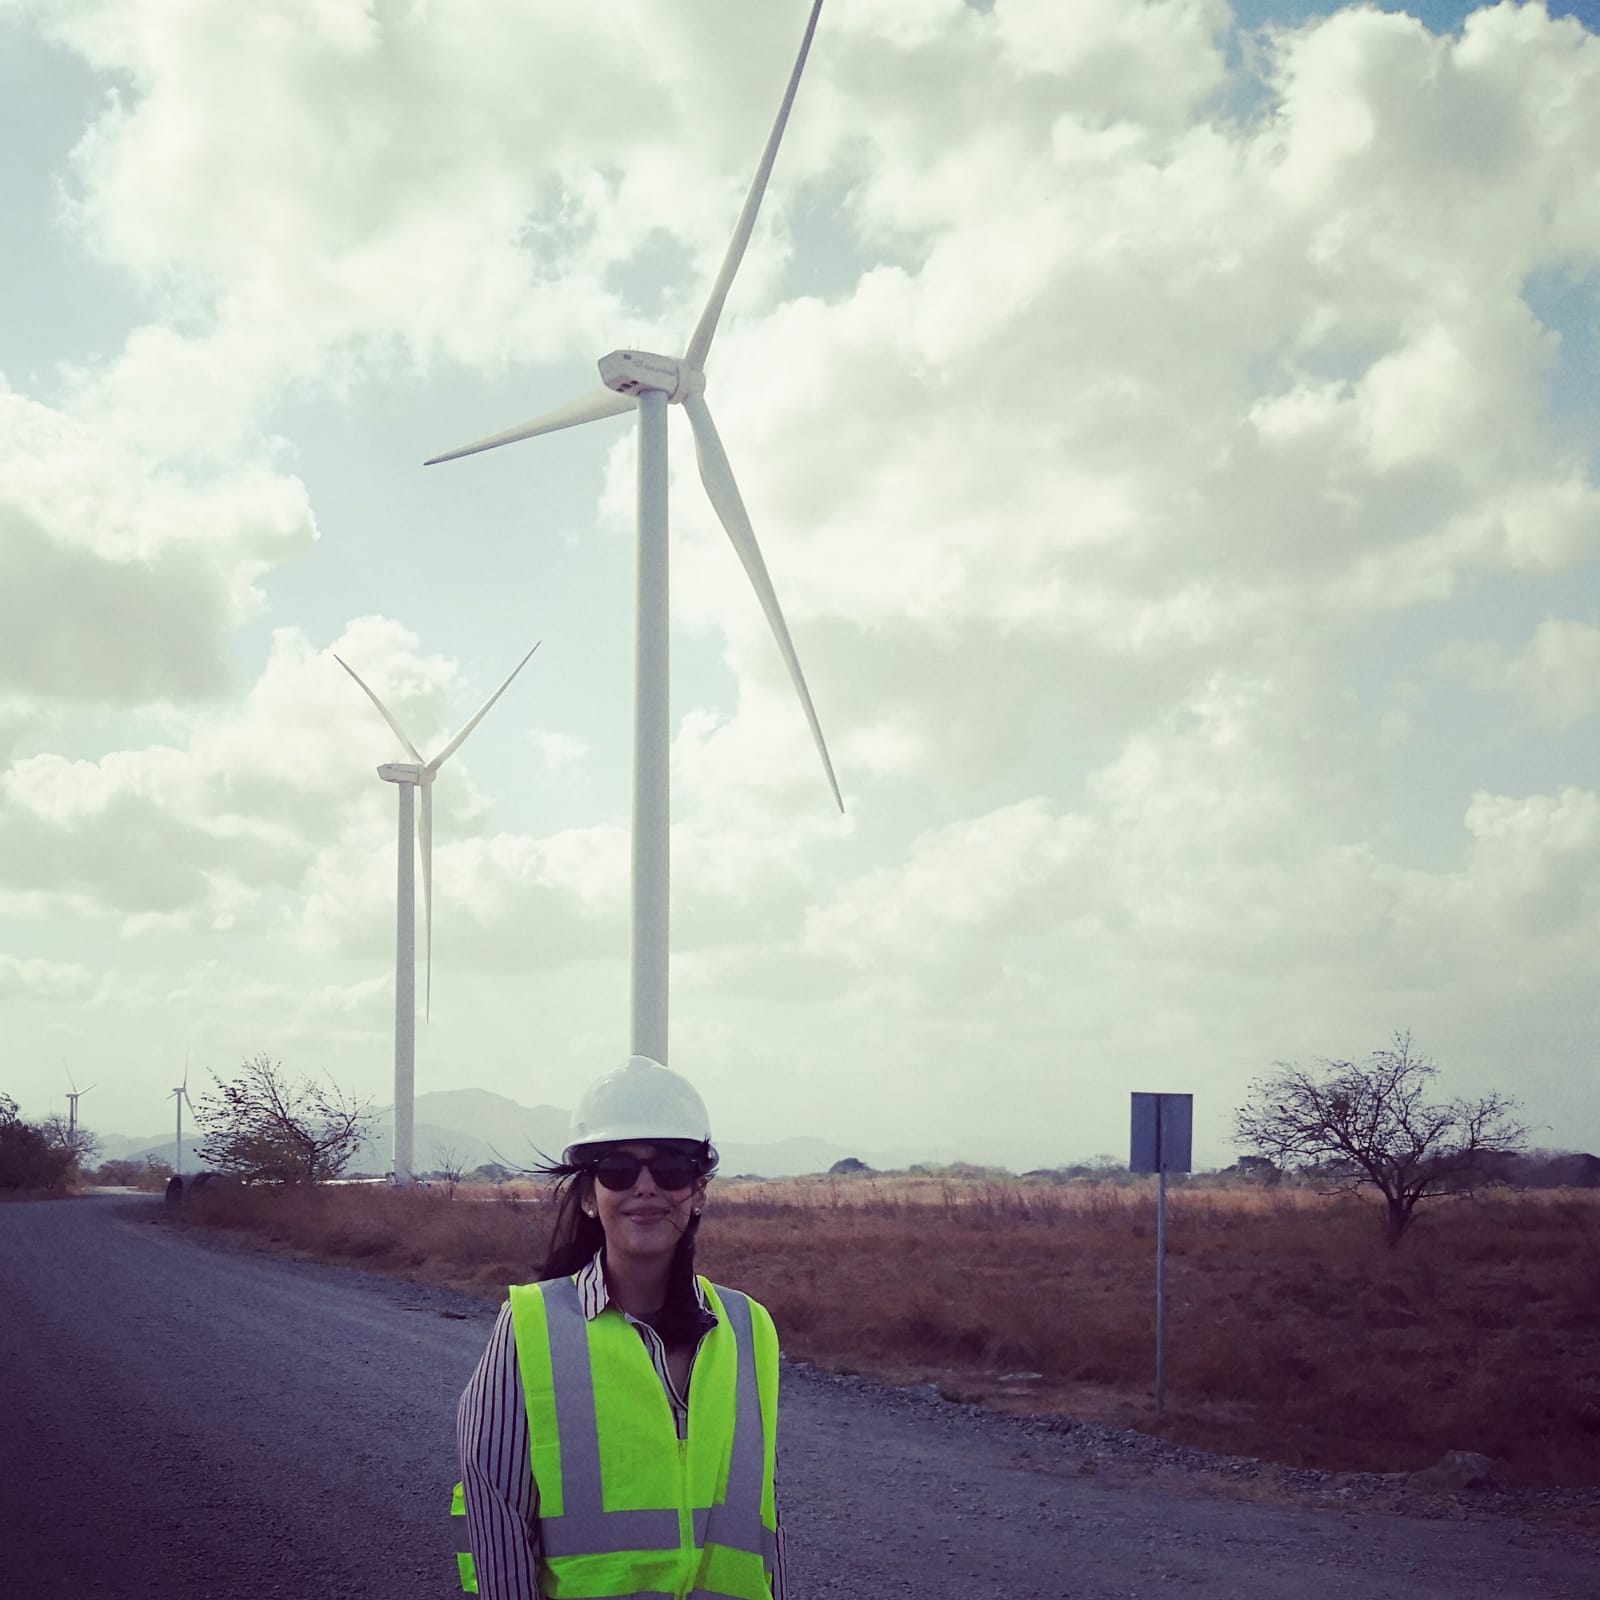 Woman stands in front of wind turbine